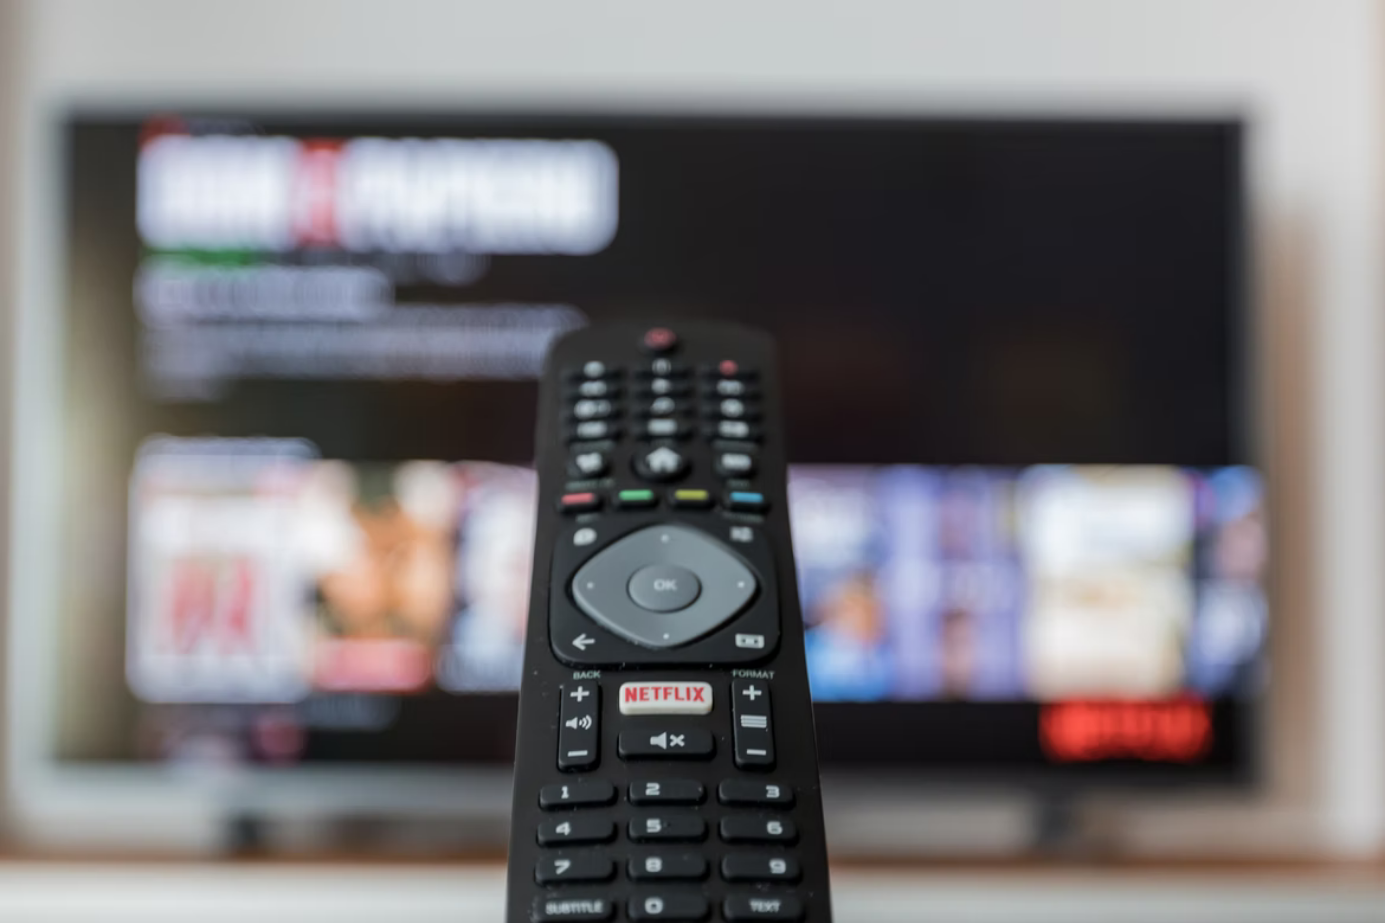 How to fix Philips TV remote not working